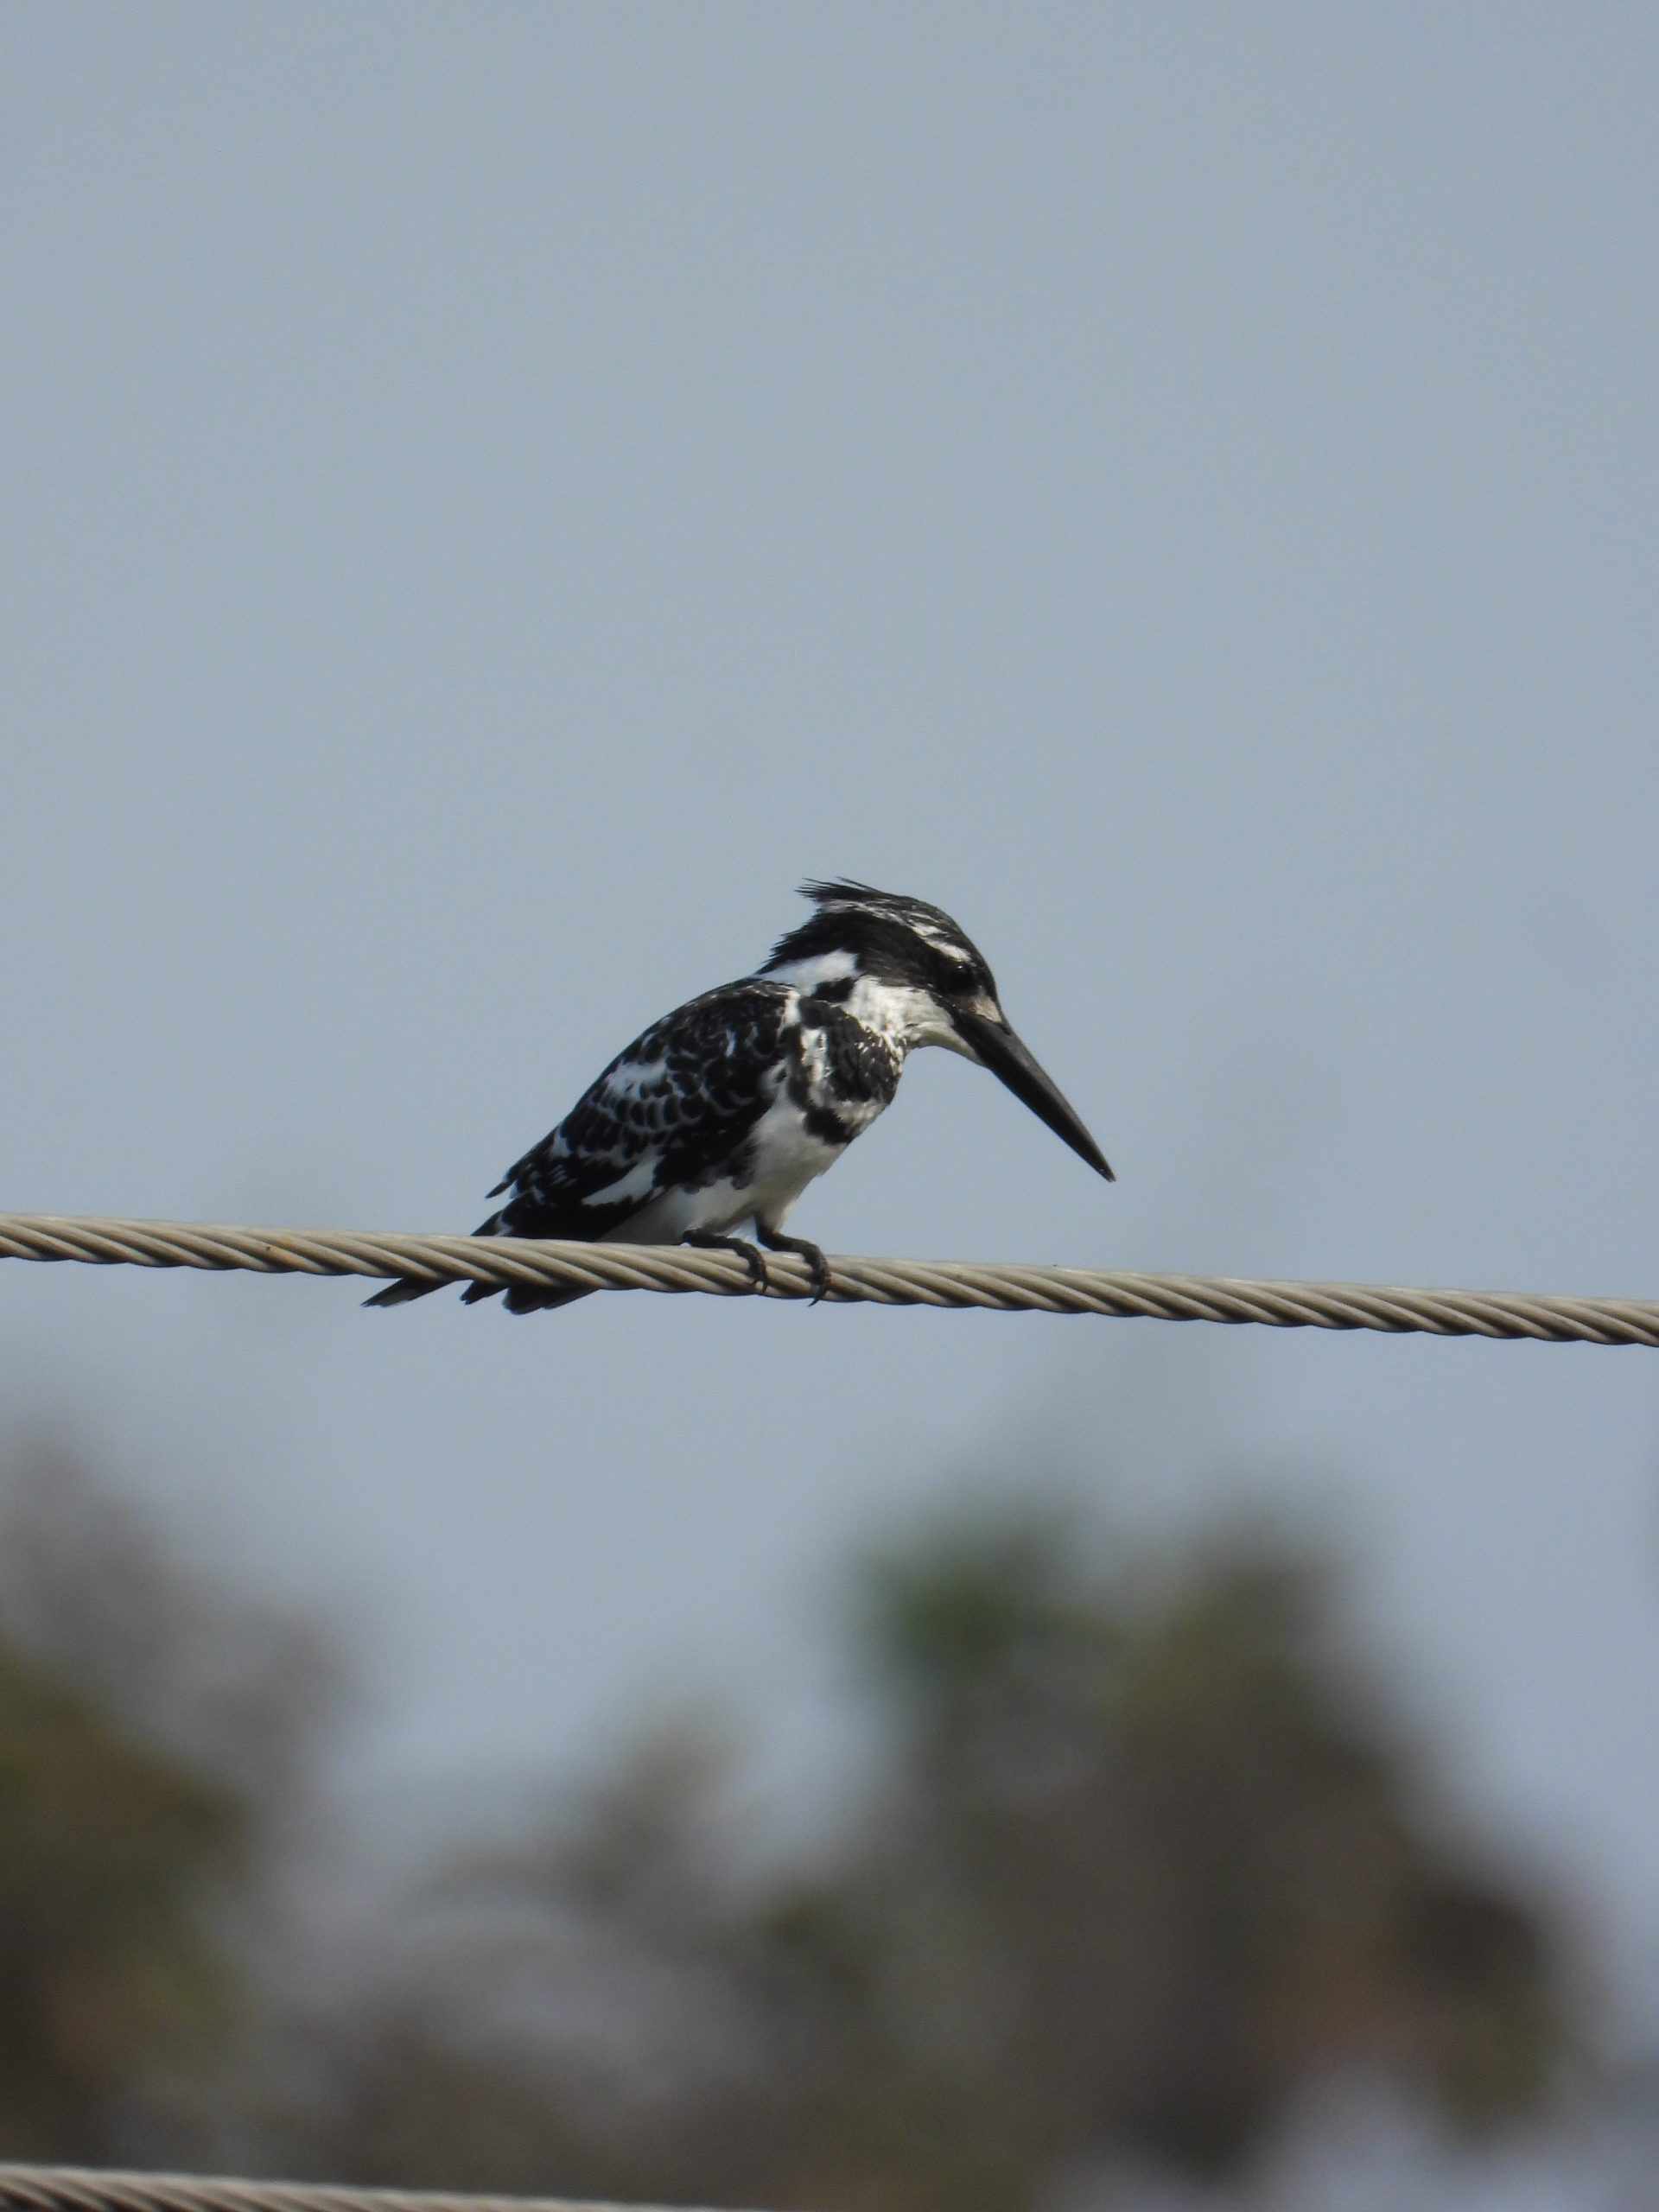 Kingfisher bird on cable